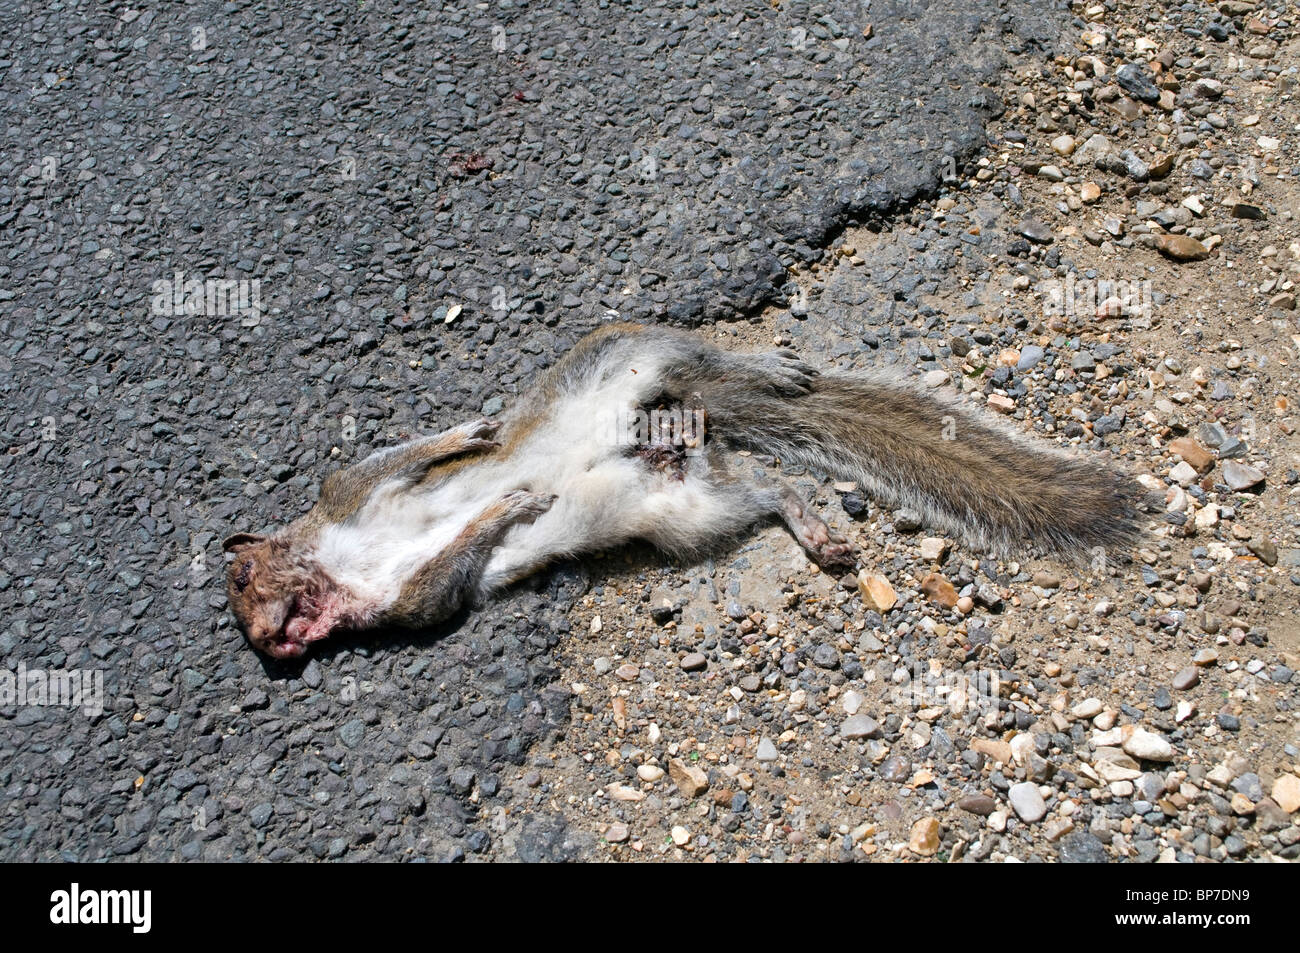 Road kill, a dead animal, a grey squirrel lies dead on a road probably having been run over by a passing motorist in a car Stock Photo